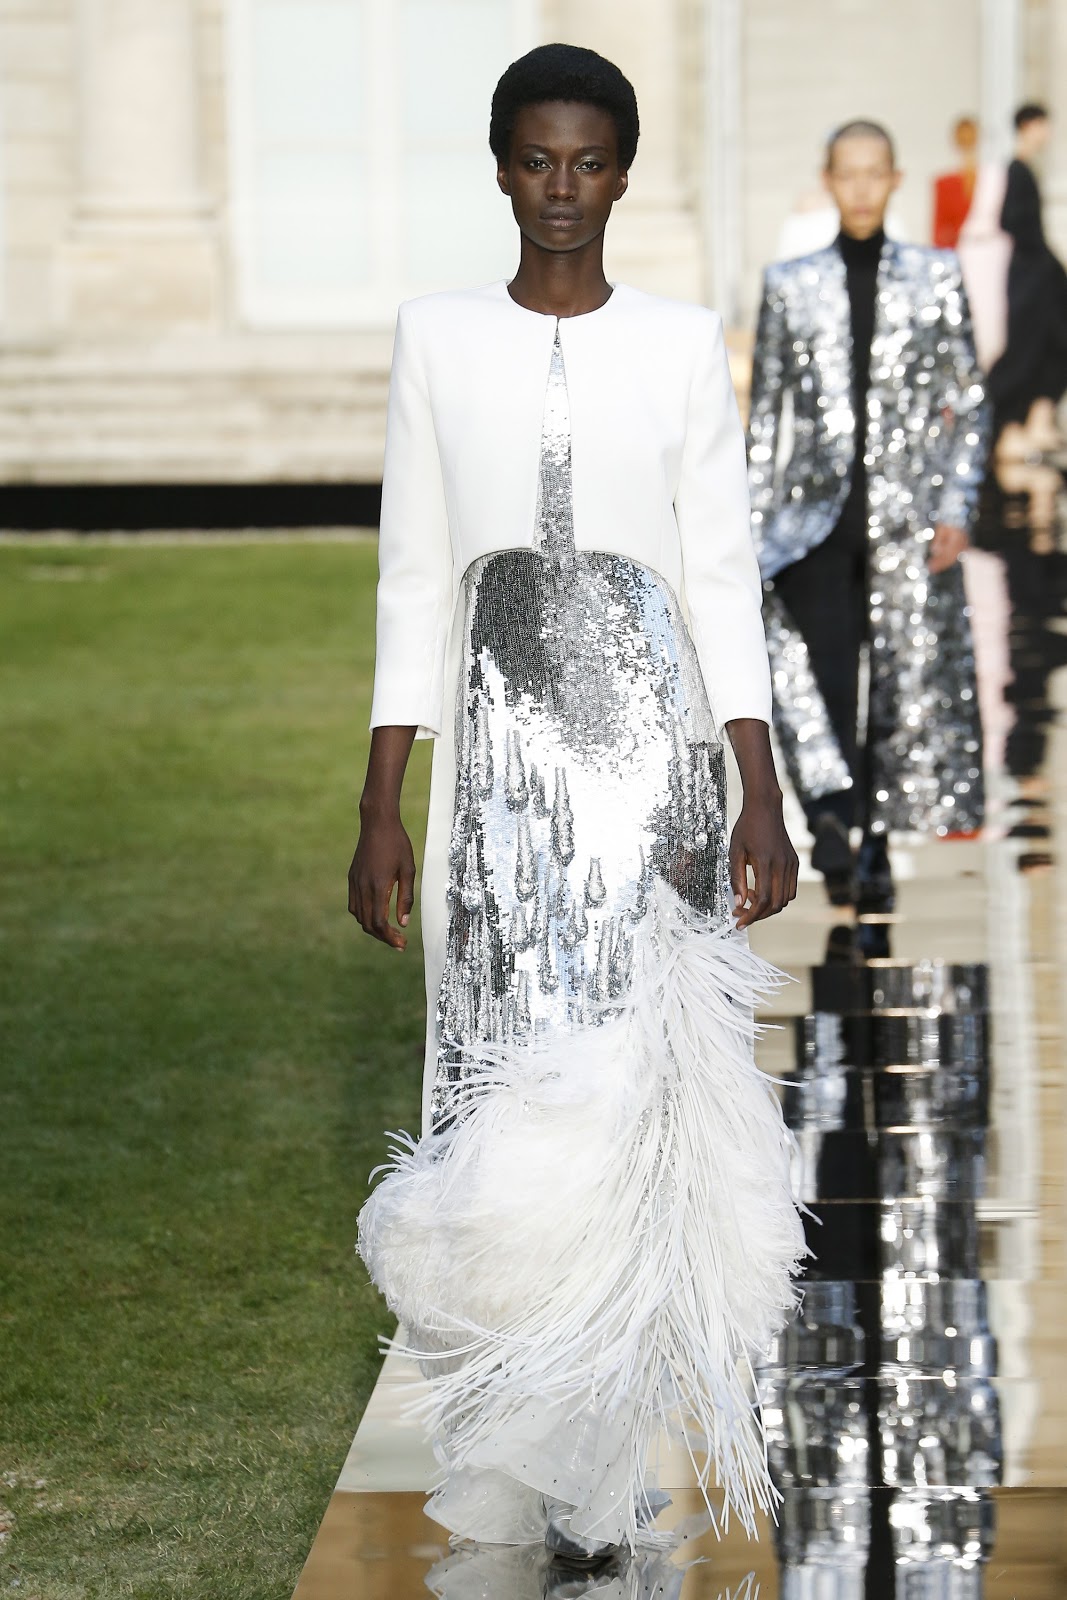 Givenchy Parigi Haute Couture Fall Winter 2018-19 | Cool Chic Style Fashion